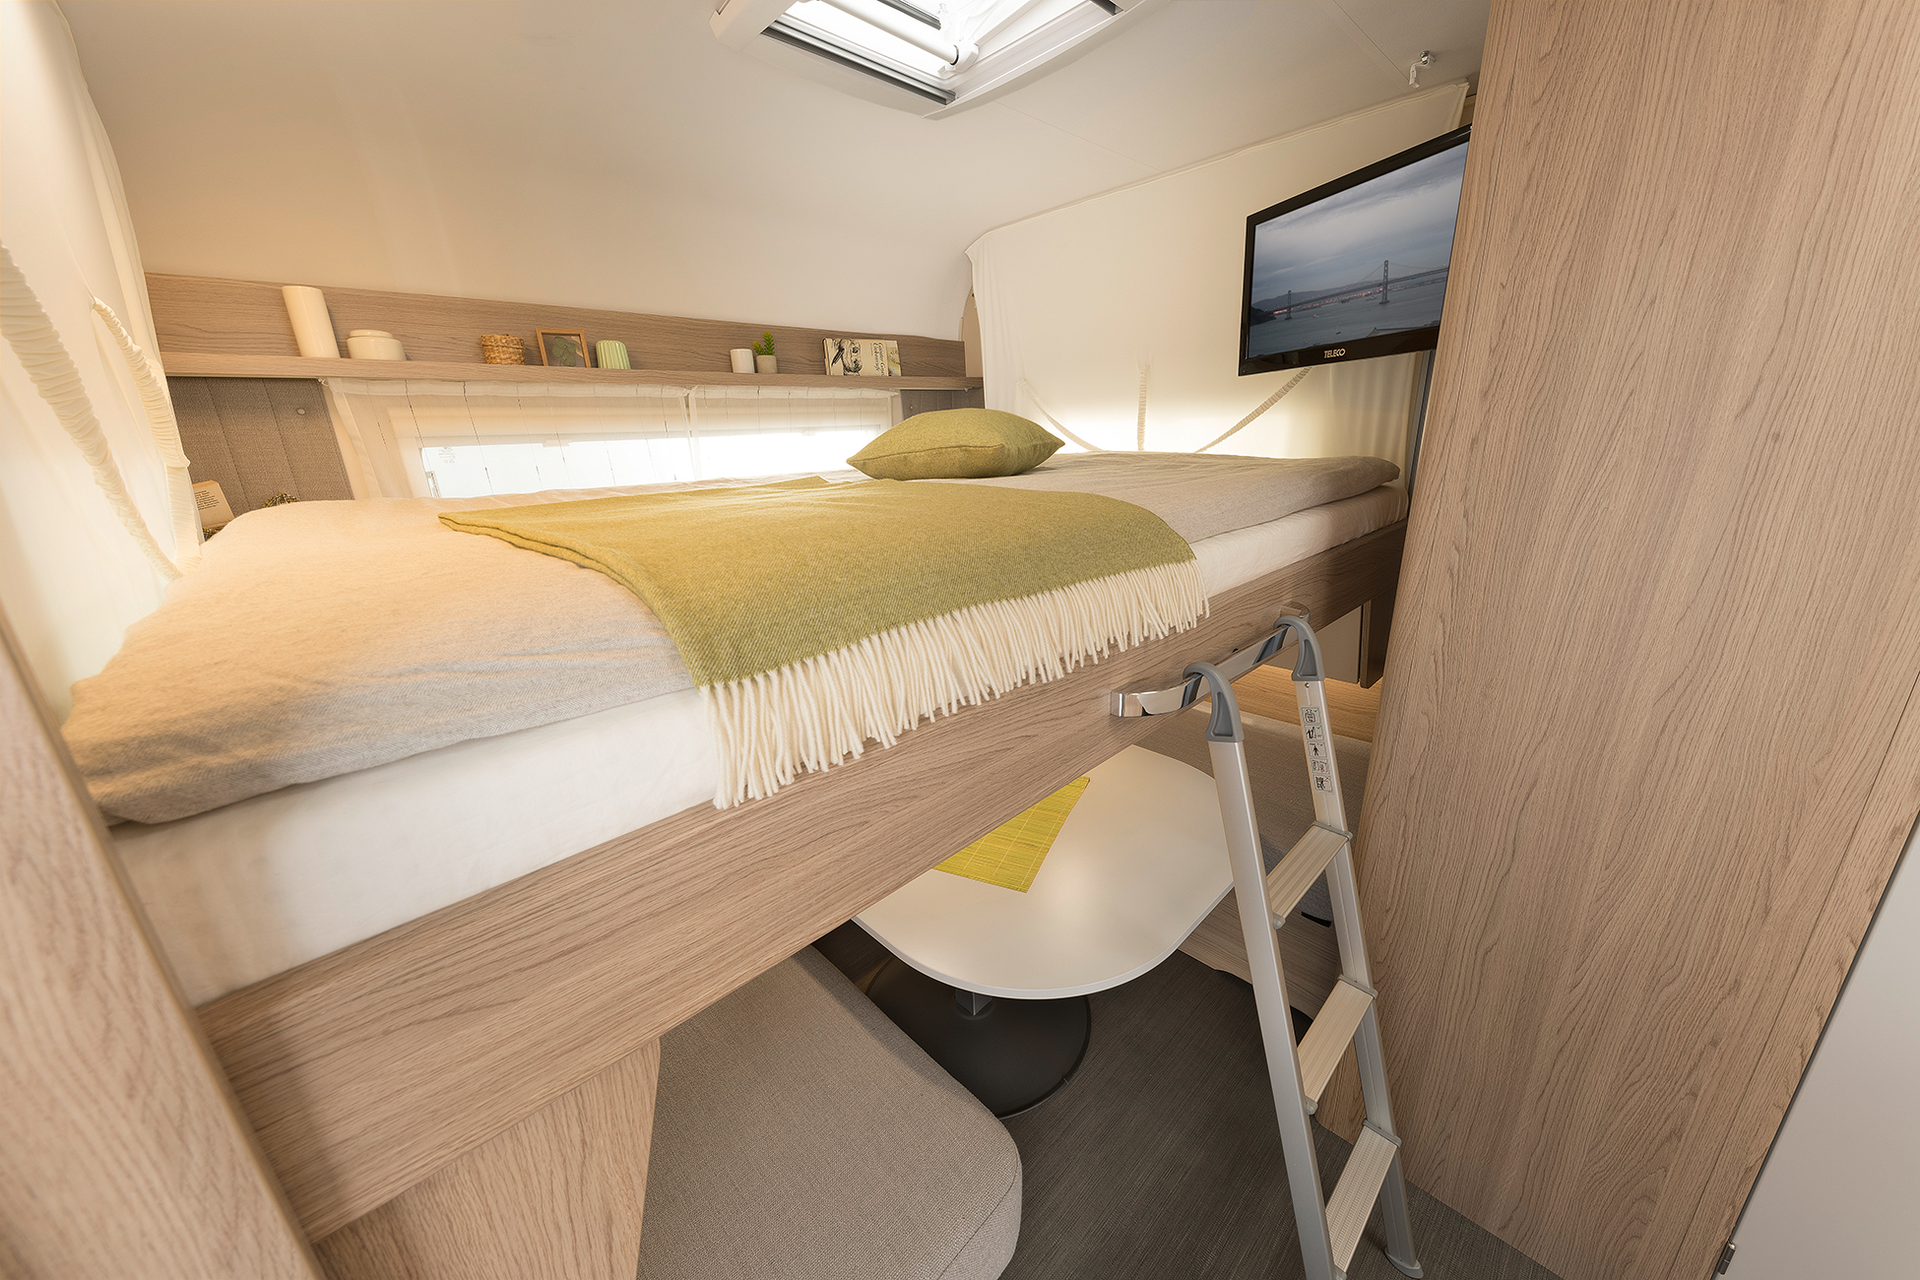 Travel as a couple or with friends in total comfort thanks to the practical pull-down bed above the seating lounge • 530 ER | Skagen